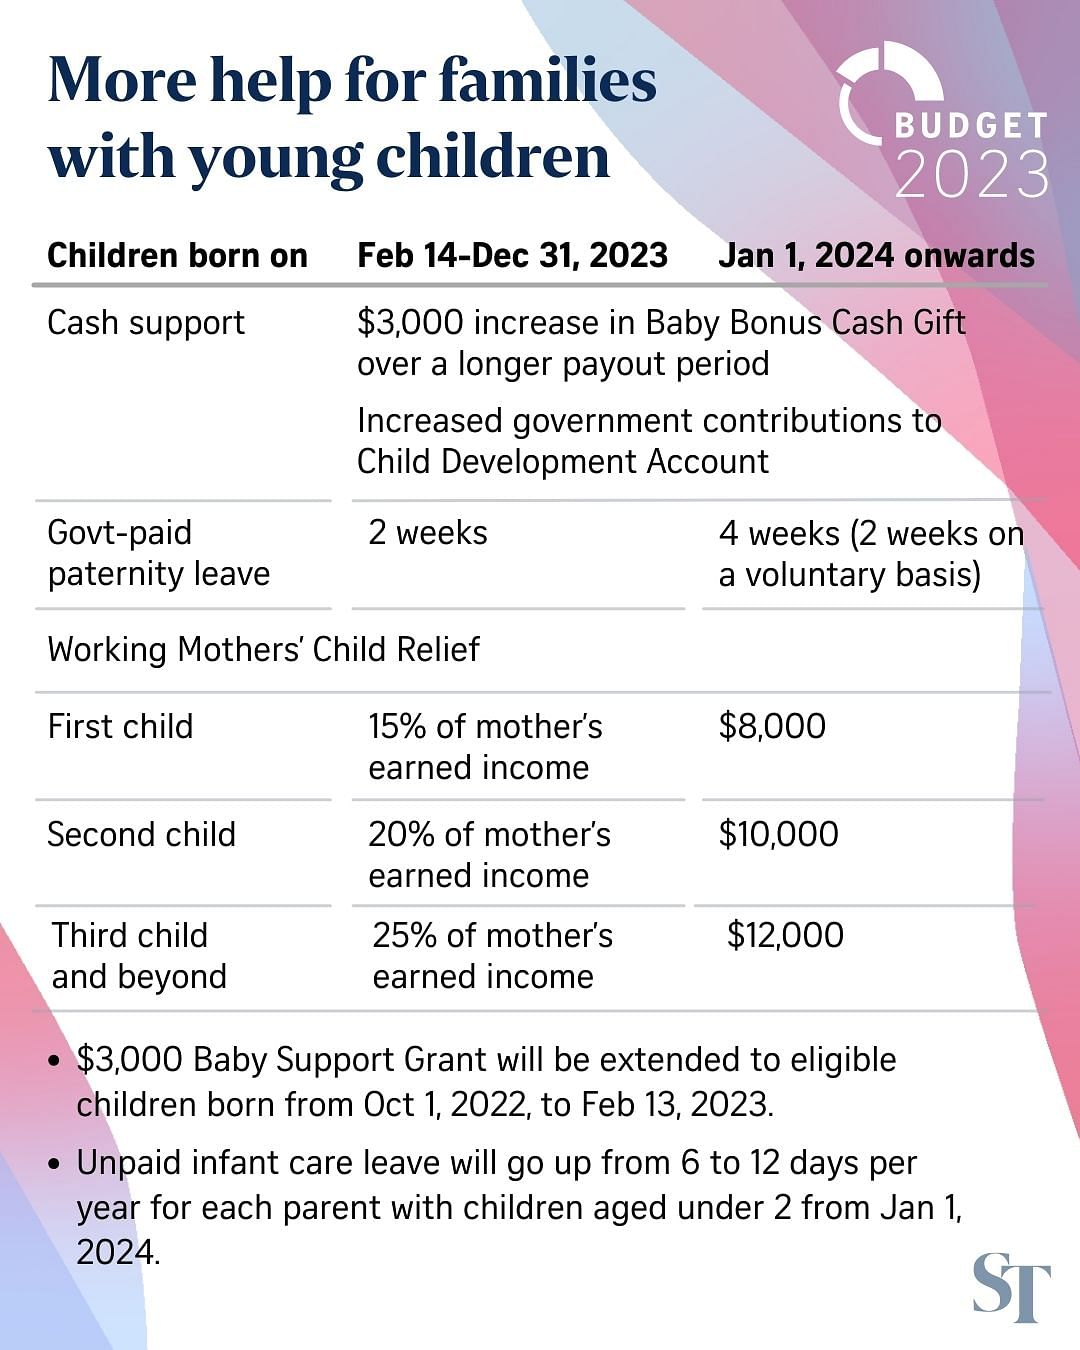 Budget 2023 3k more in Baby Bonus, more financial support for